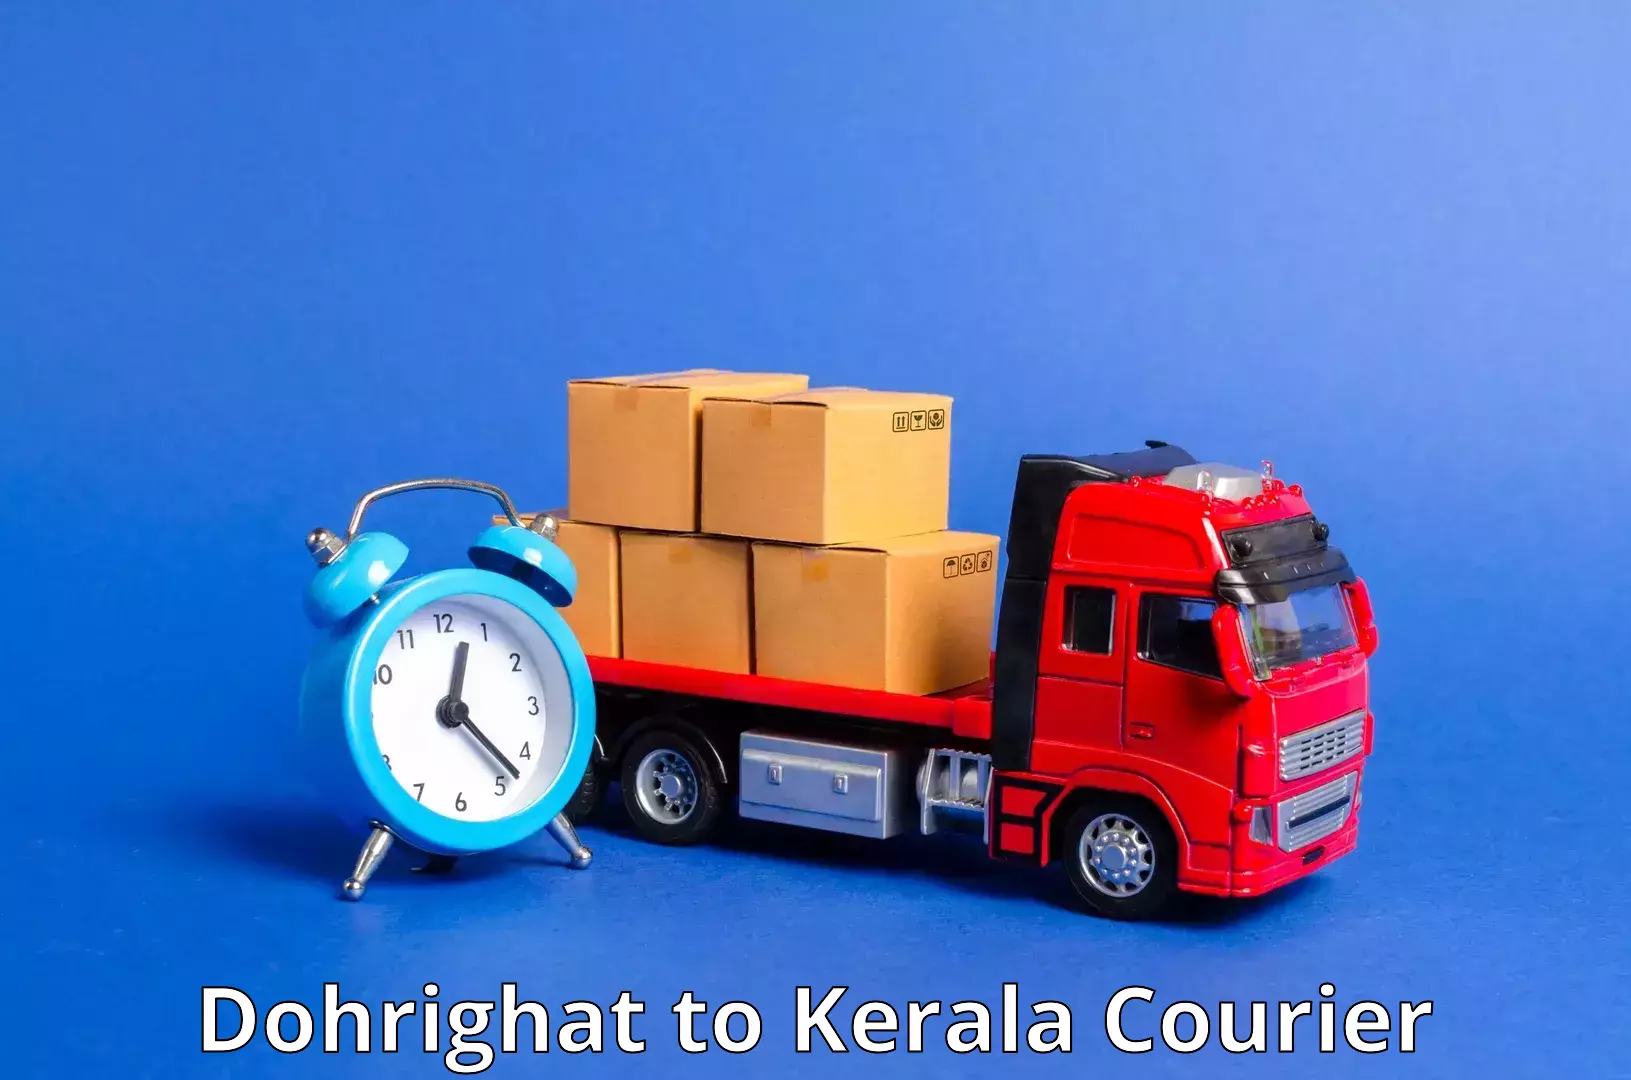 24-hour courier service Dohrighat to Kerala